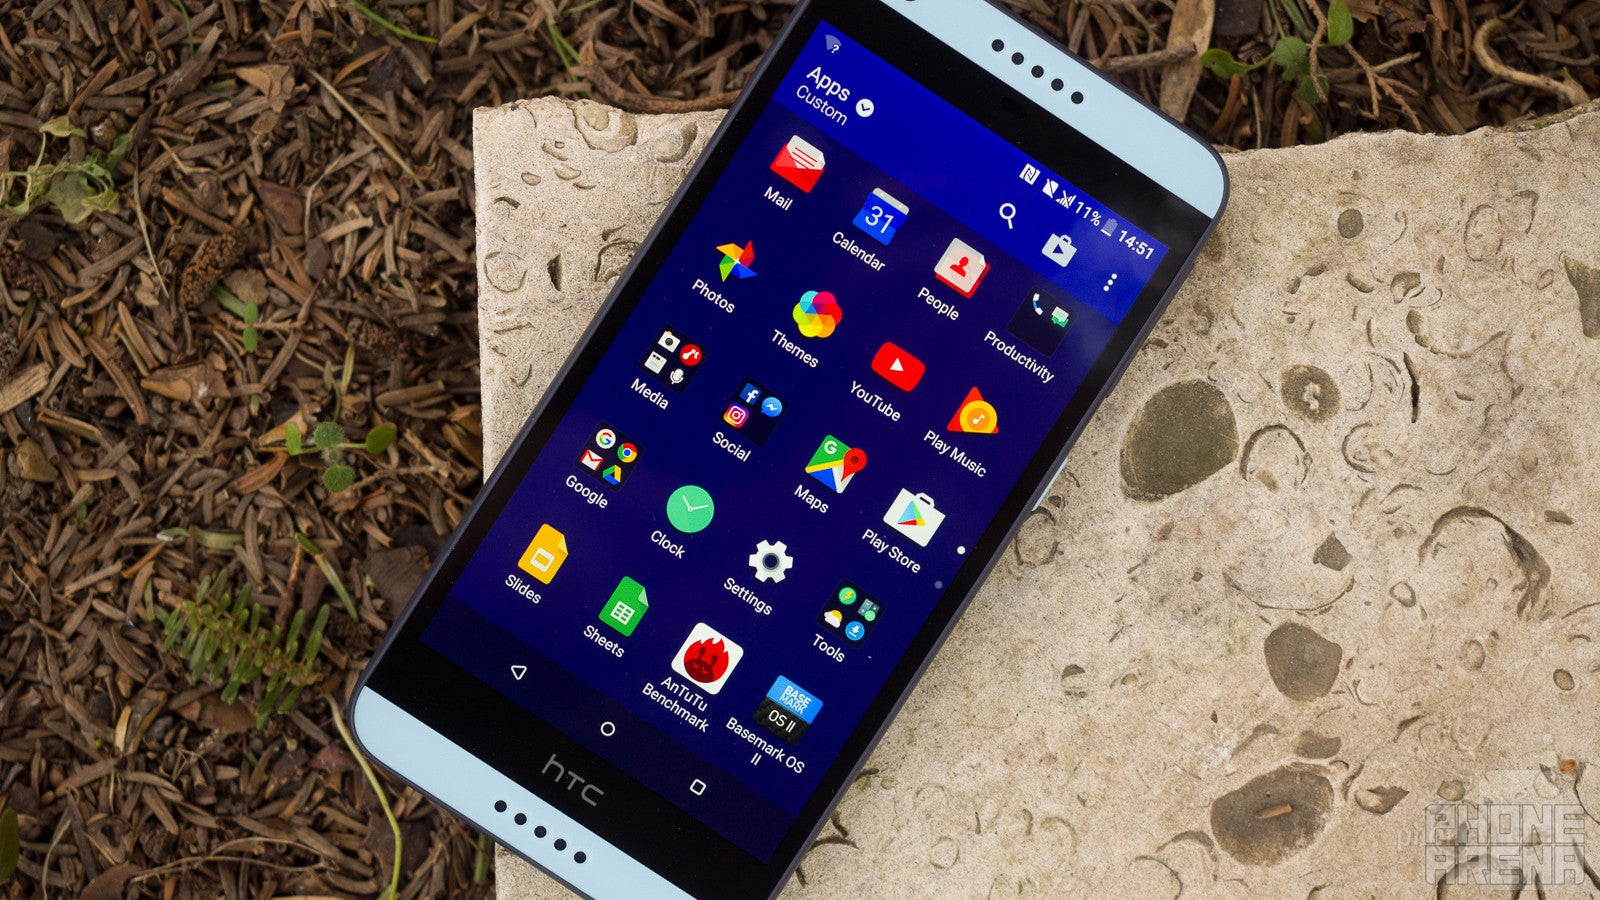 HTC Desire 650 Review